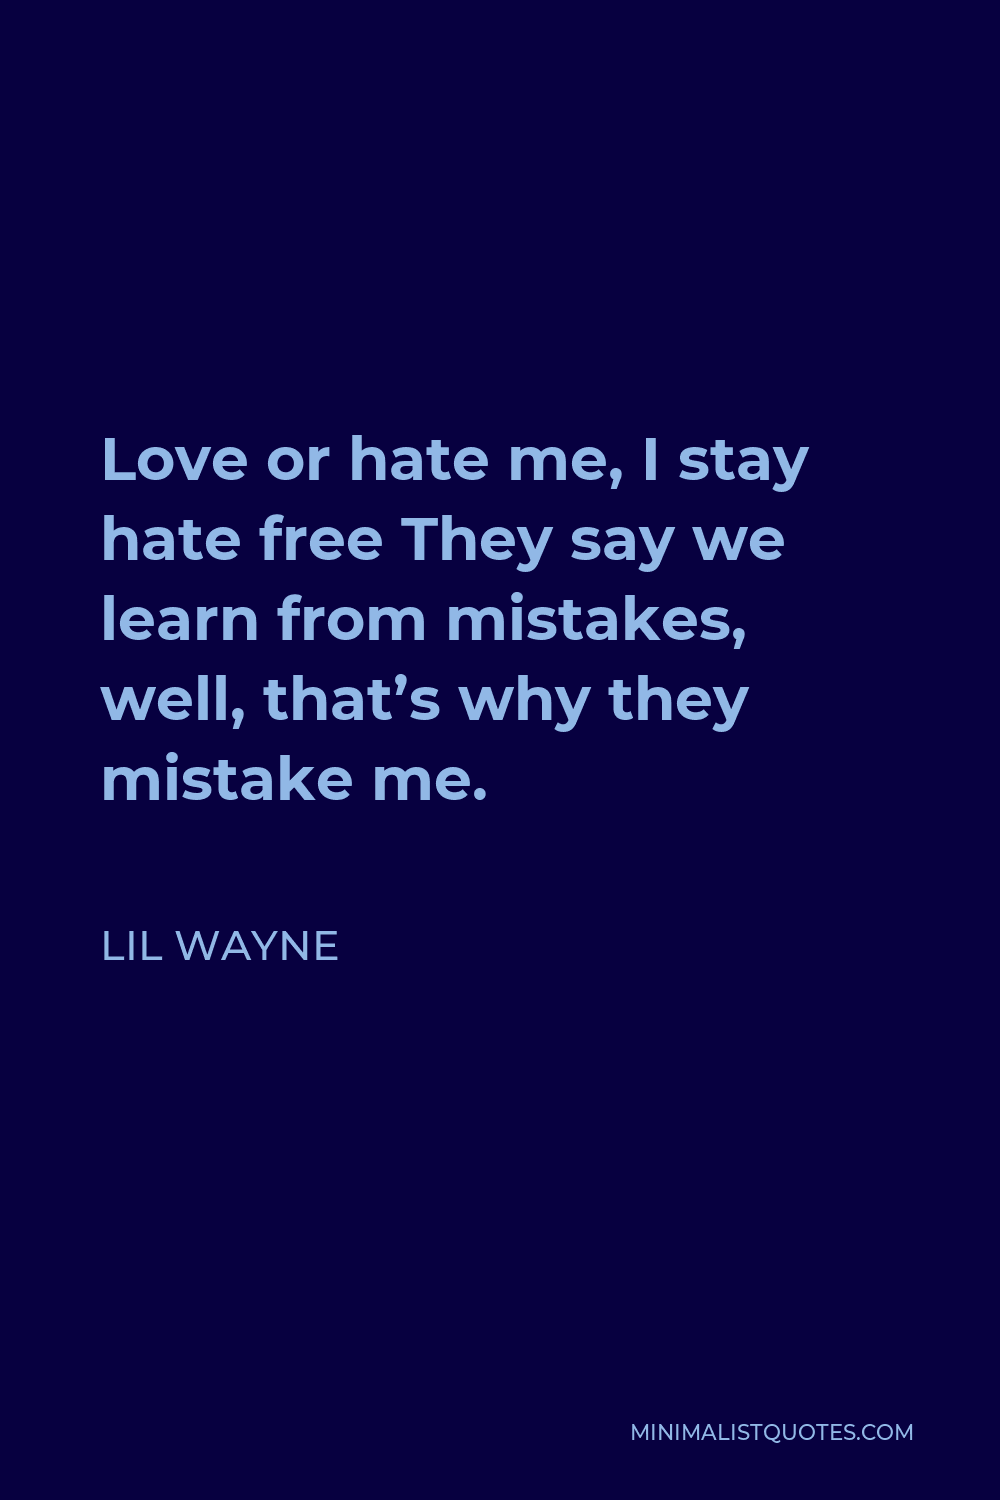 Lil Wayne Quote - Love or hate me, I stay hate free They say we learn from mistakes, well, that’s why they mistake me.